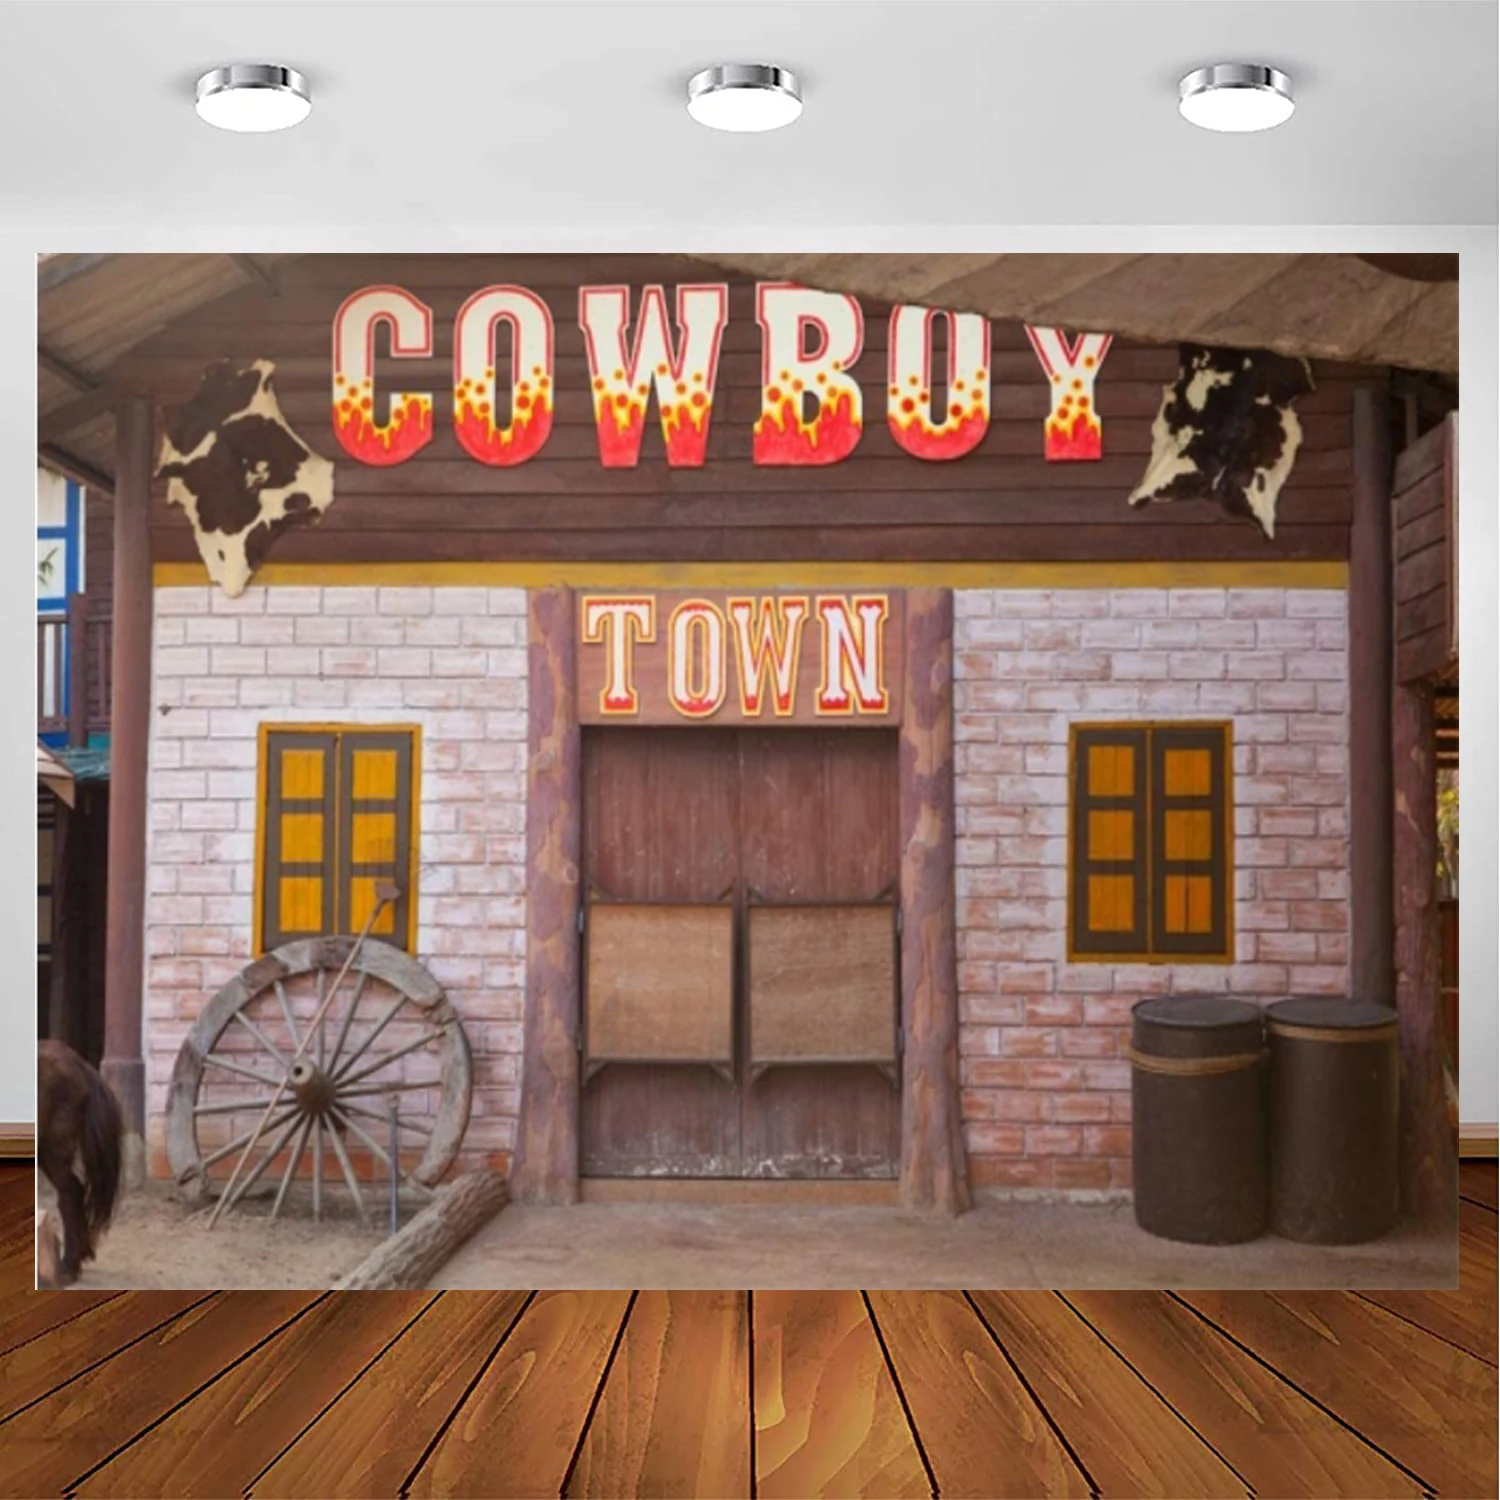 

Country Western Barn Photography Backdrop Parties Wild West Cowboy Farmhouse Tavern Wood Wheel Town Building Doorway Background